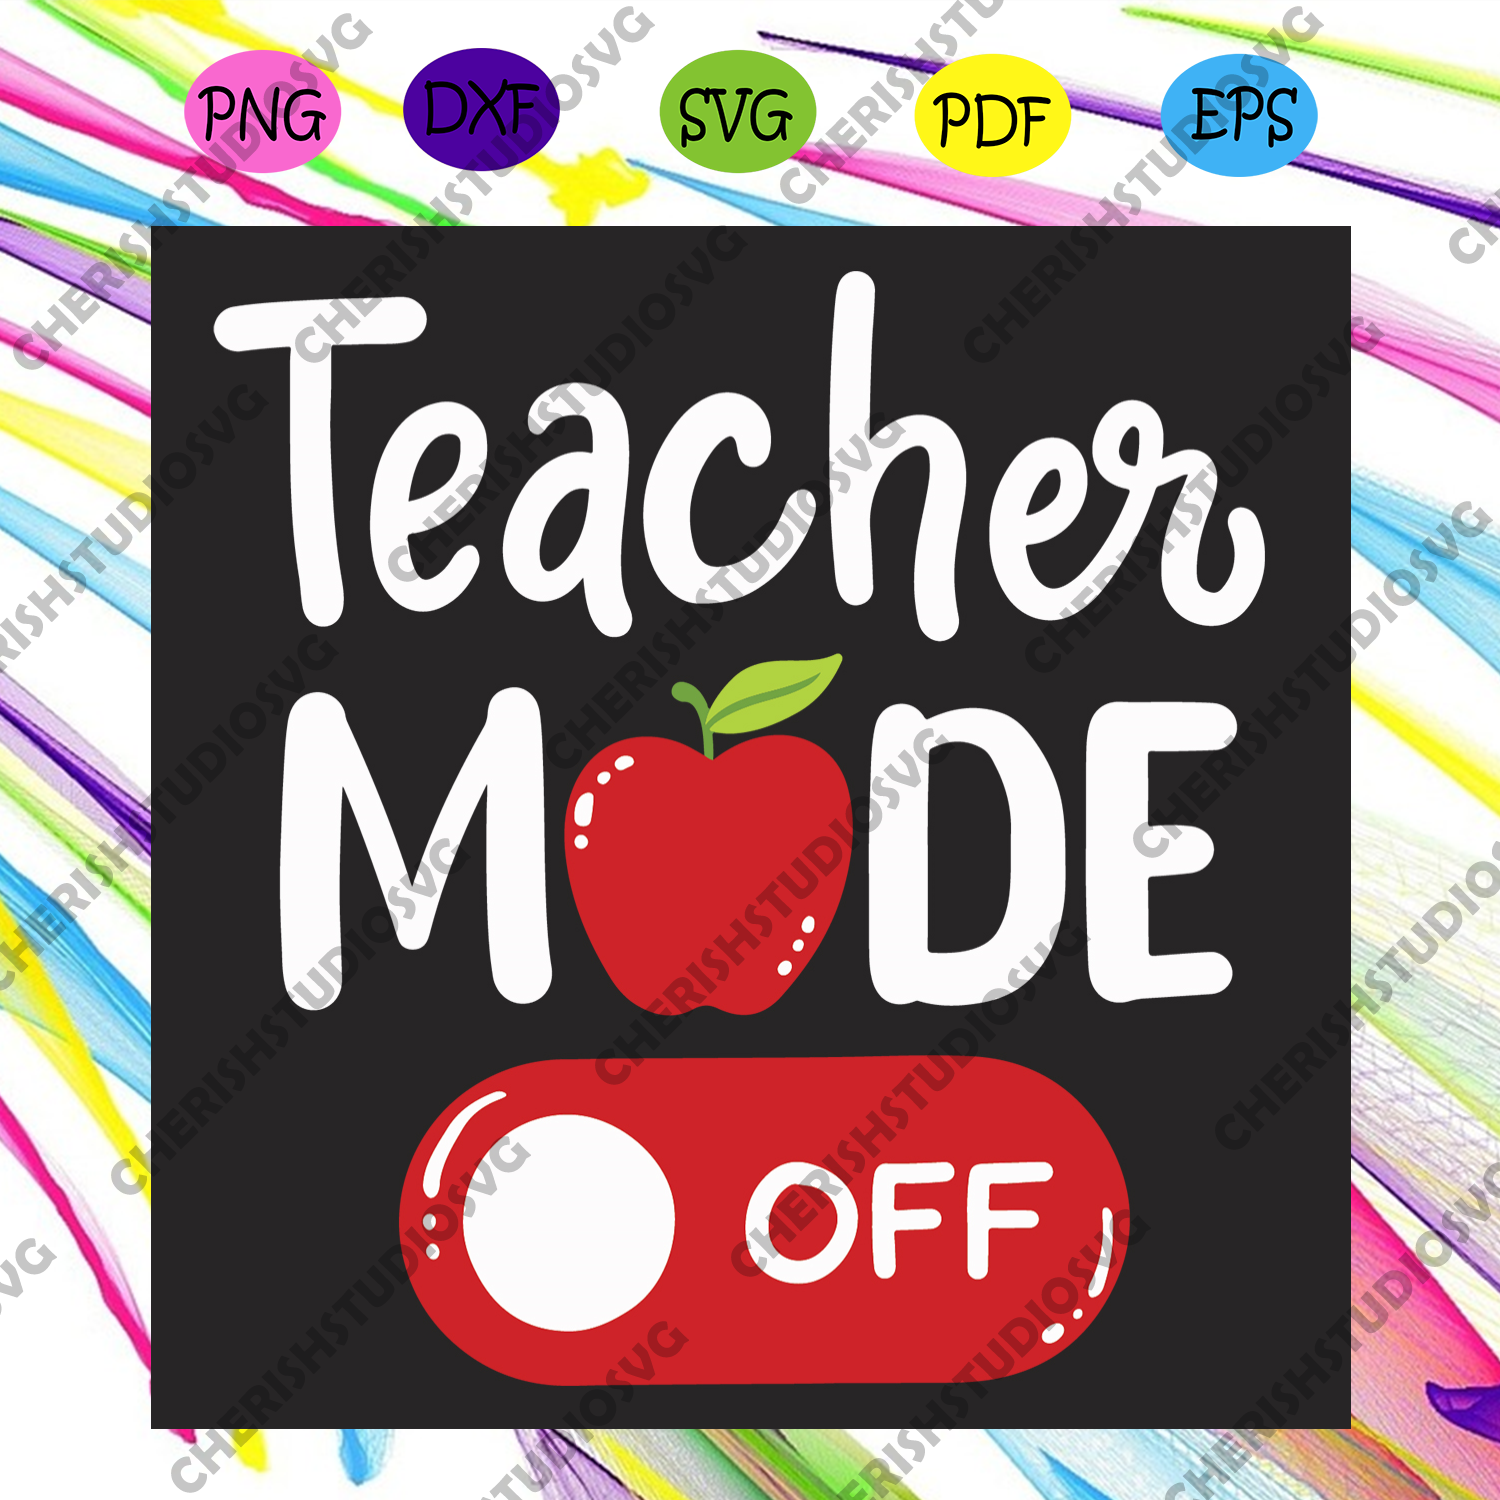 Teacher Mode On Svg - 1535+ Best Quality File - Free SVG Cut Files for